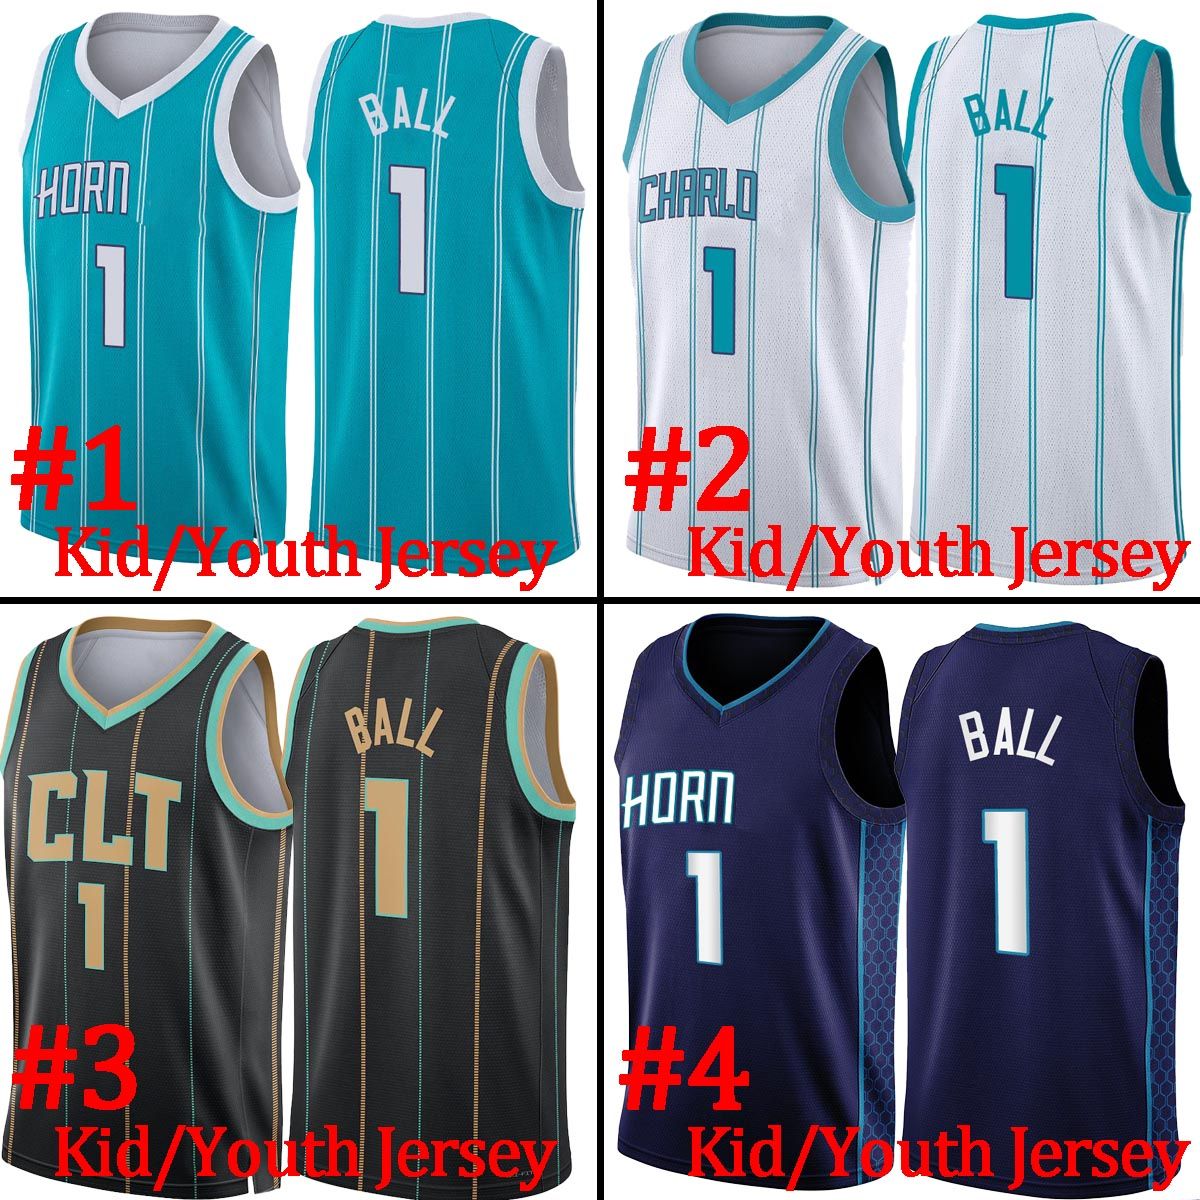 Youth/Kid Jersey-10